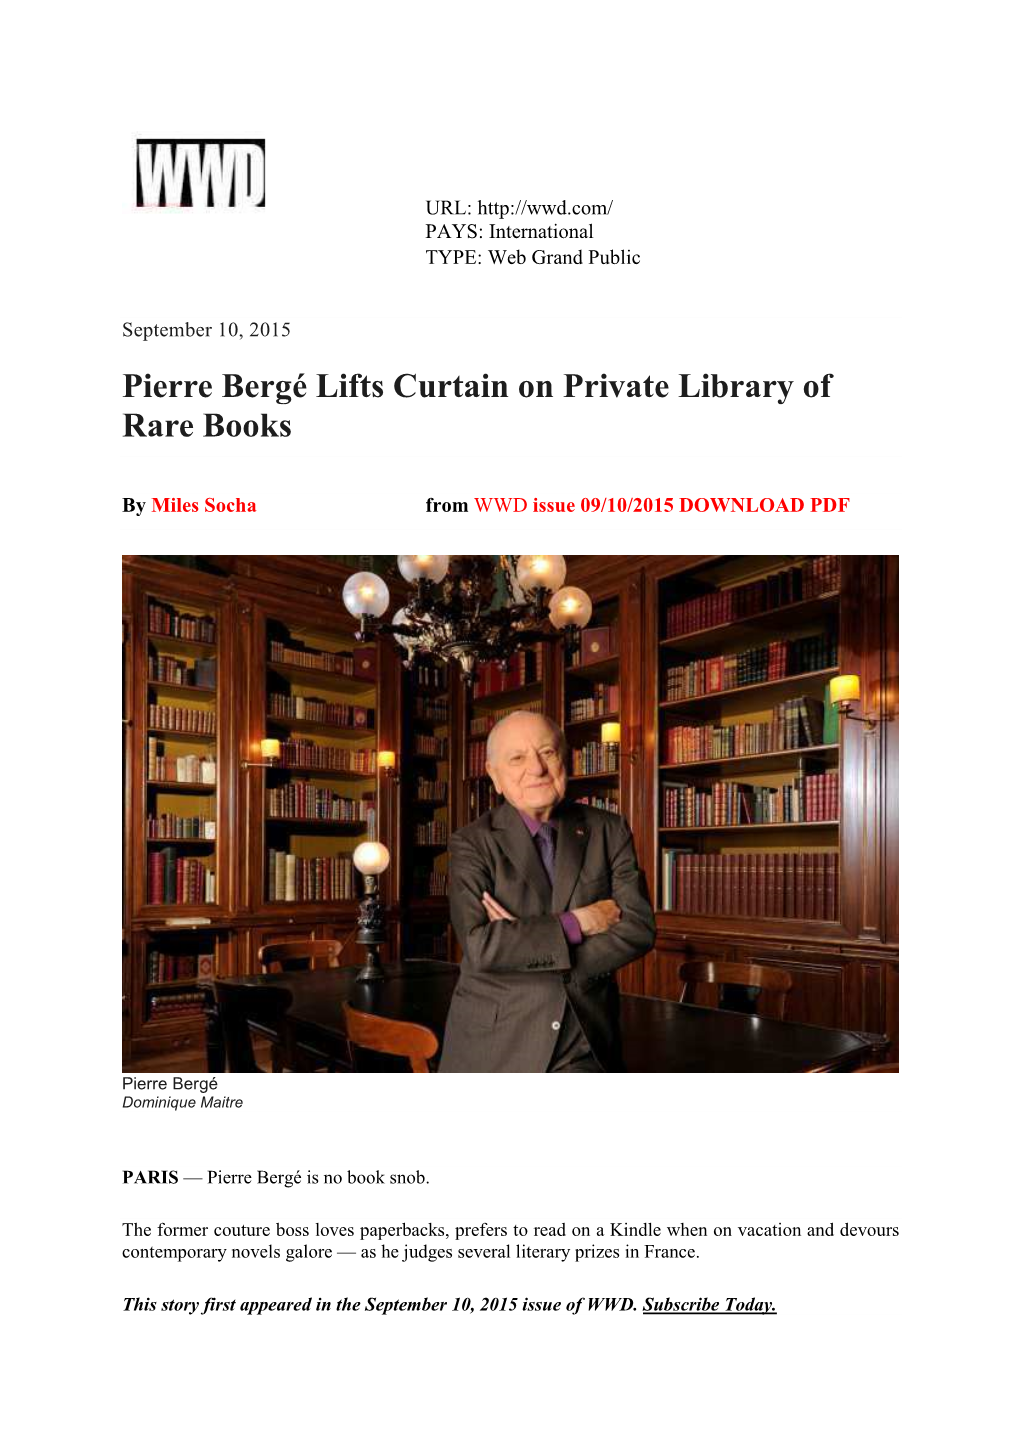 Pierre Bergé Lifts Curtain on Private Library of Rare Books